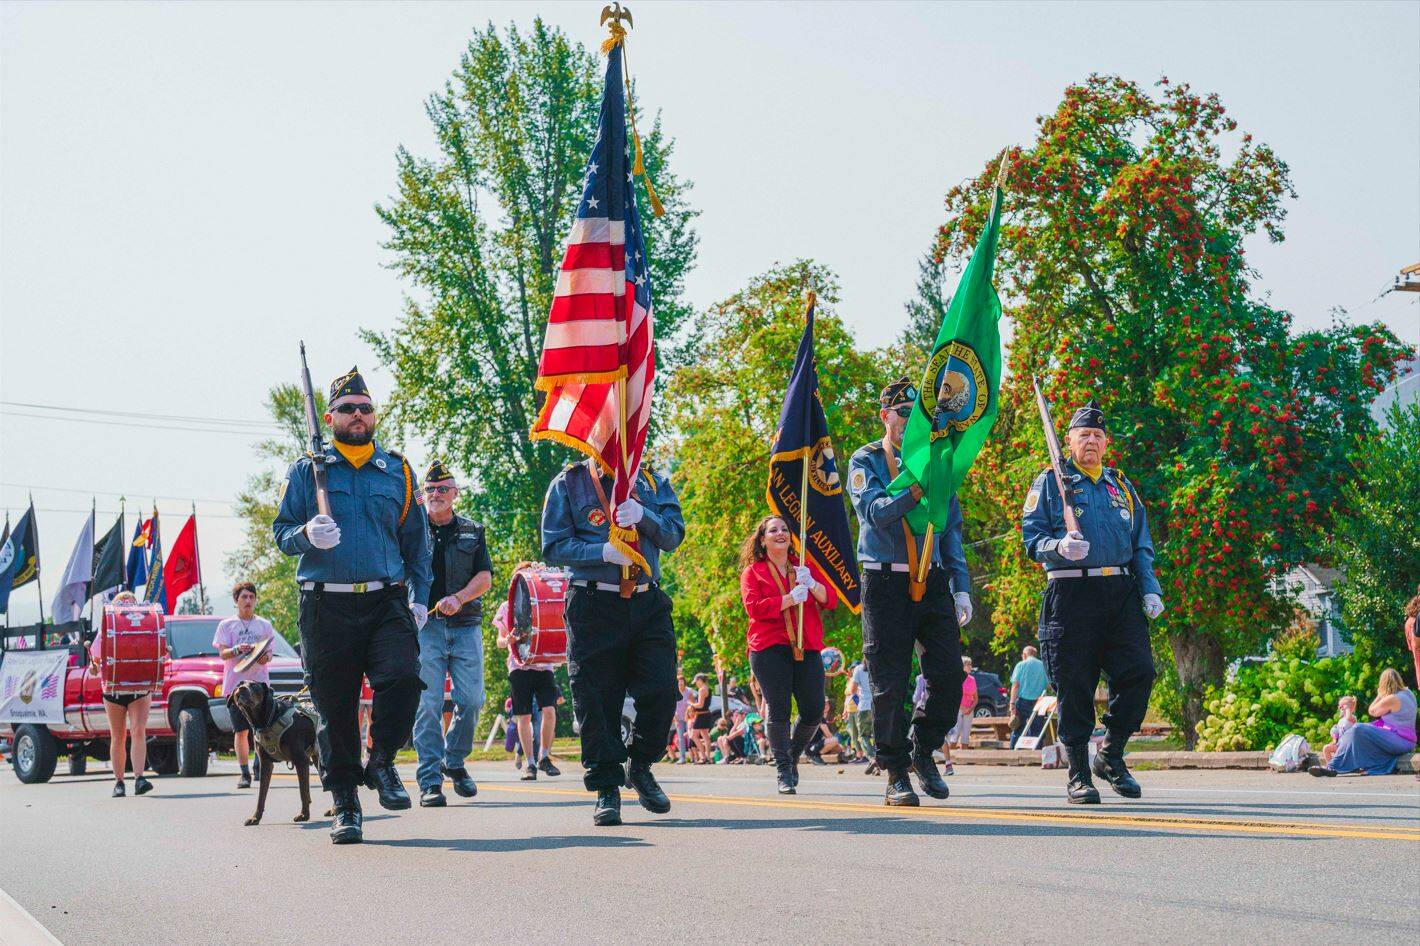 The 84th annual Snoqualmie Days festival Grand Parade held on Aug. 19. All Photos by Dylan Lockard unless noted.